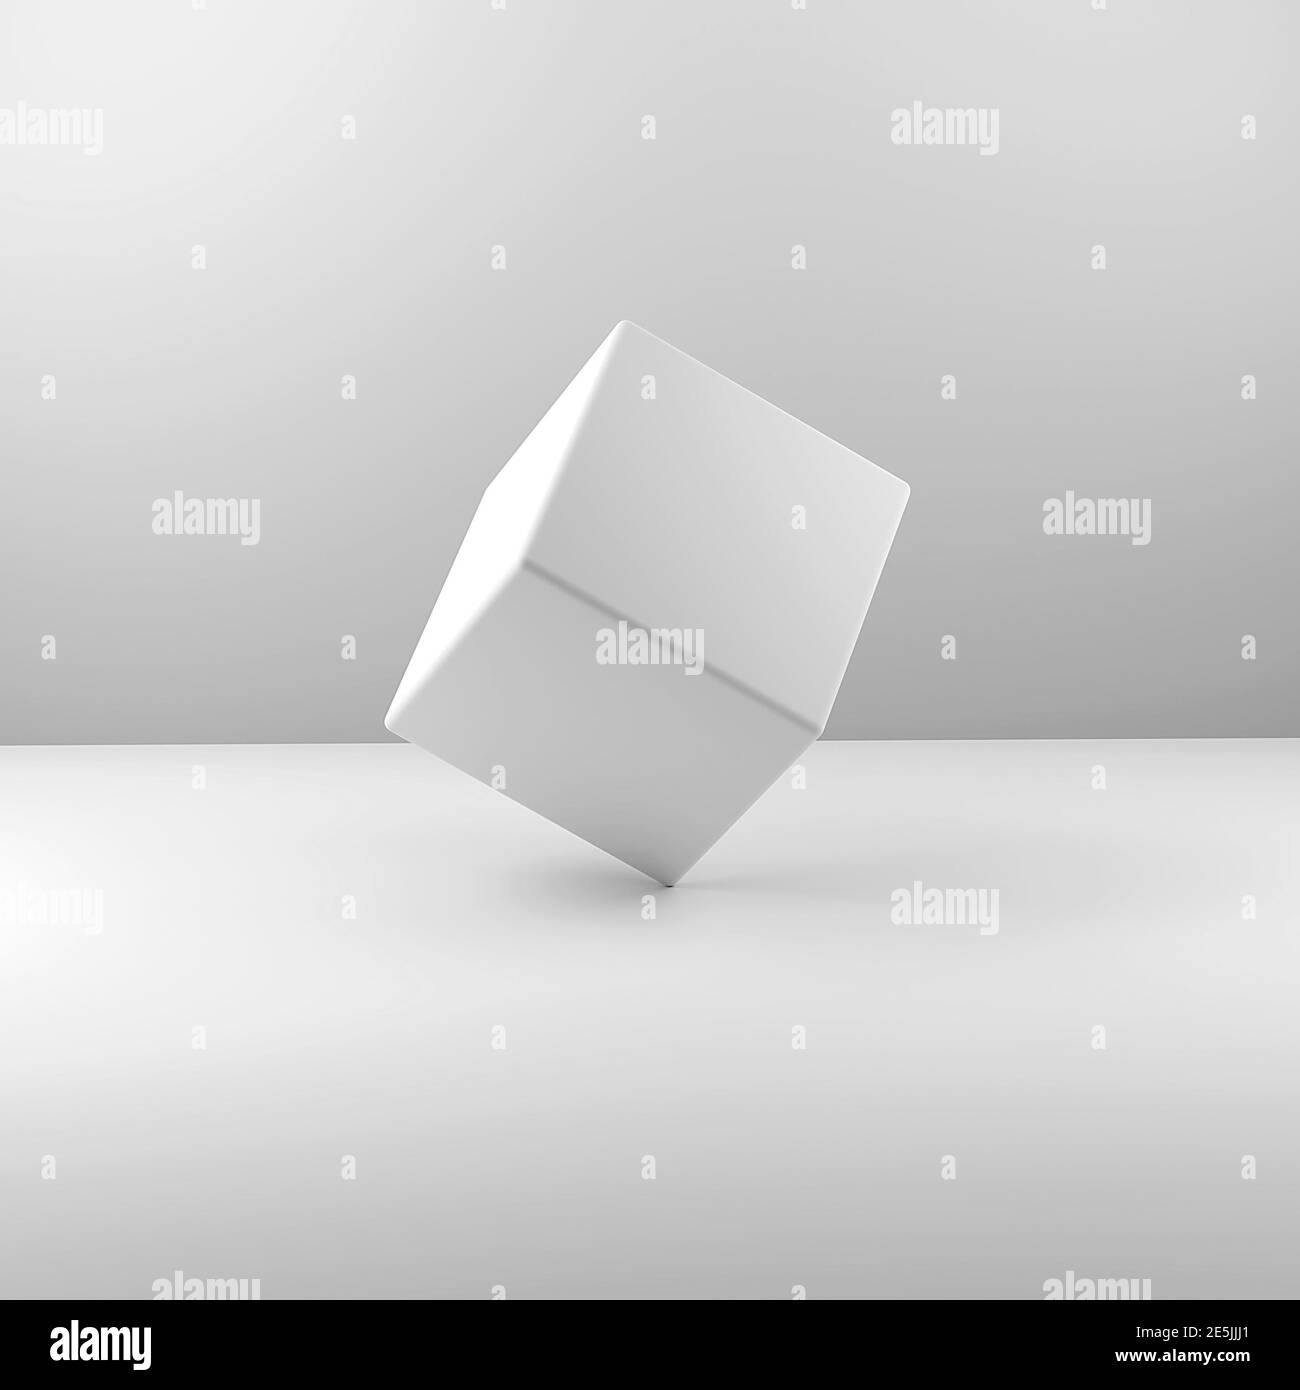 Blank dice Black and White Stock Photos & Images - Alamy